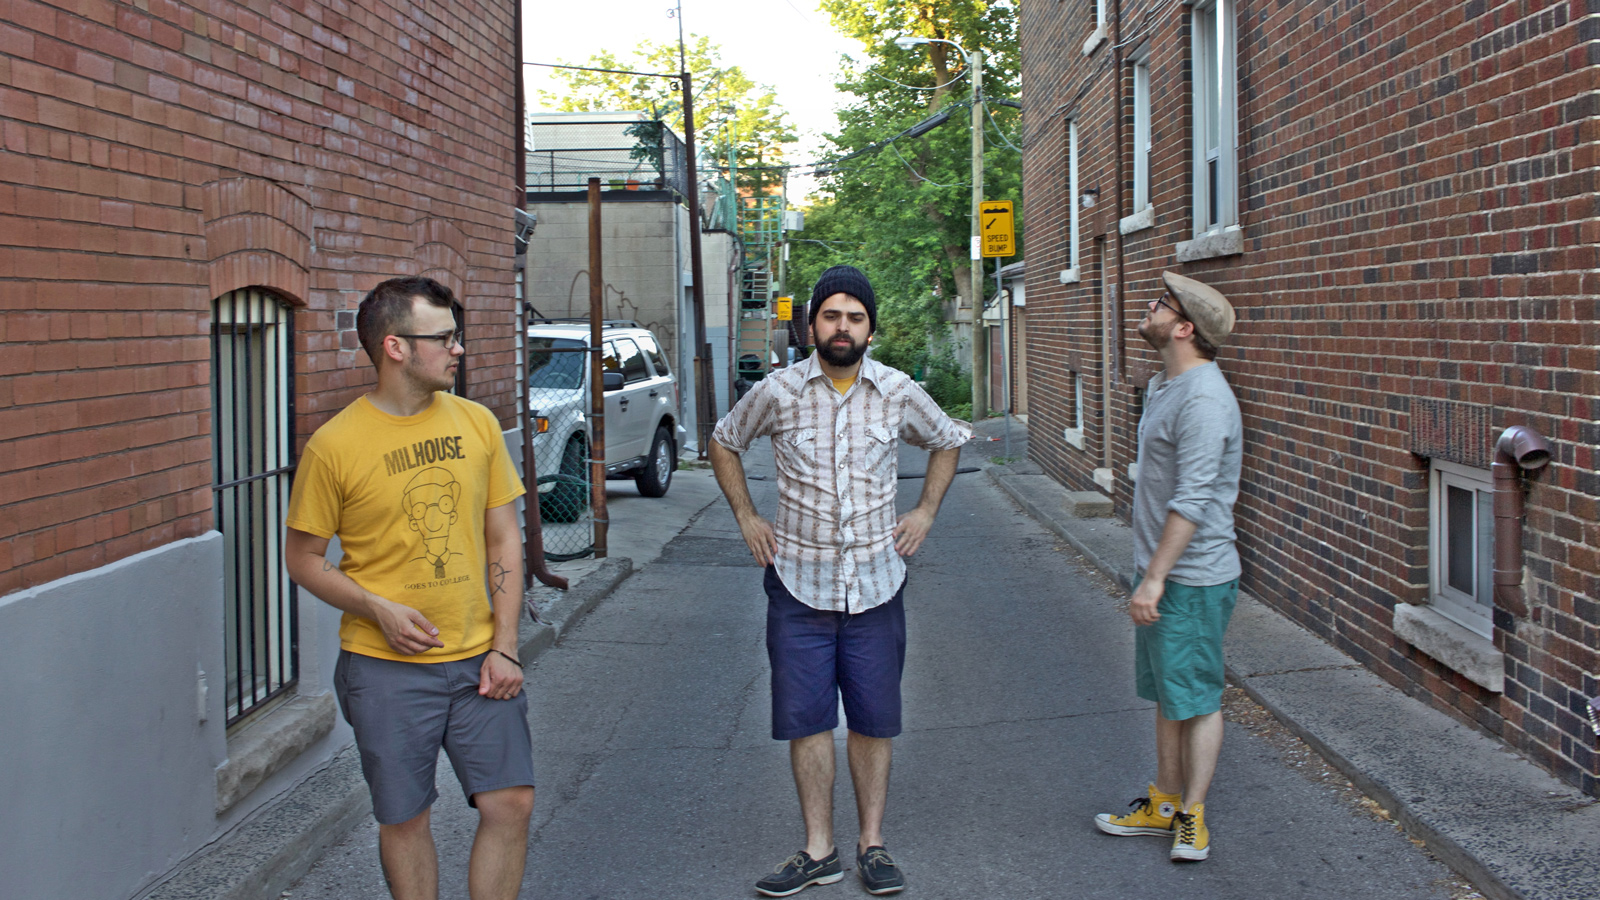 brick walls line a paved alley, with three young men in shorts and t-shirts standing at varied distances from the camera